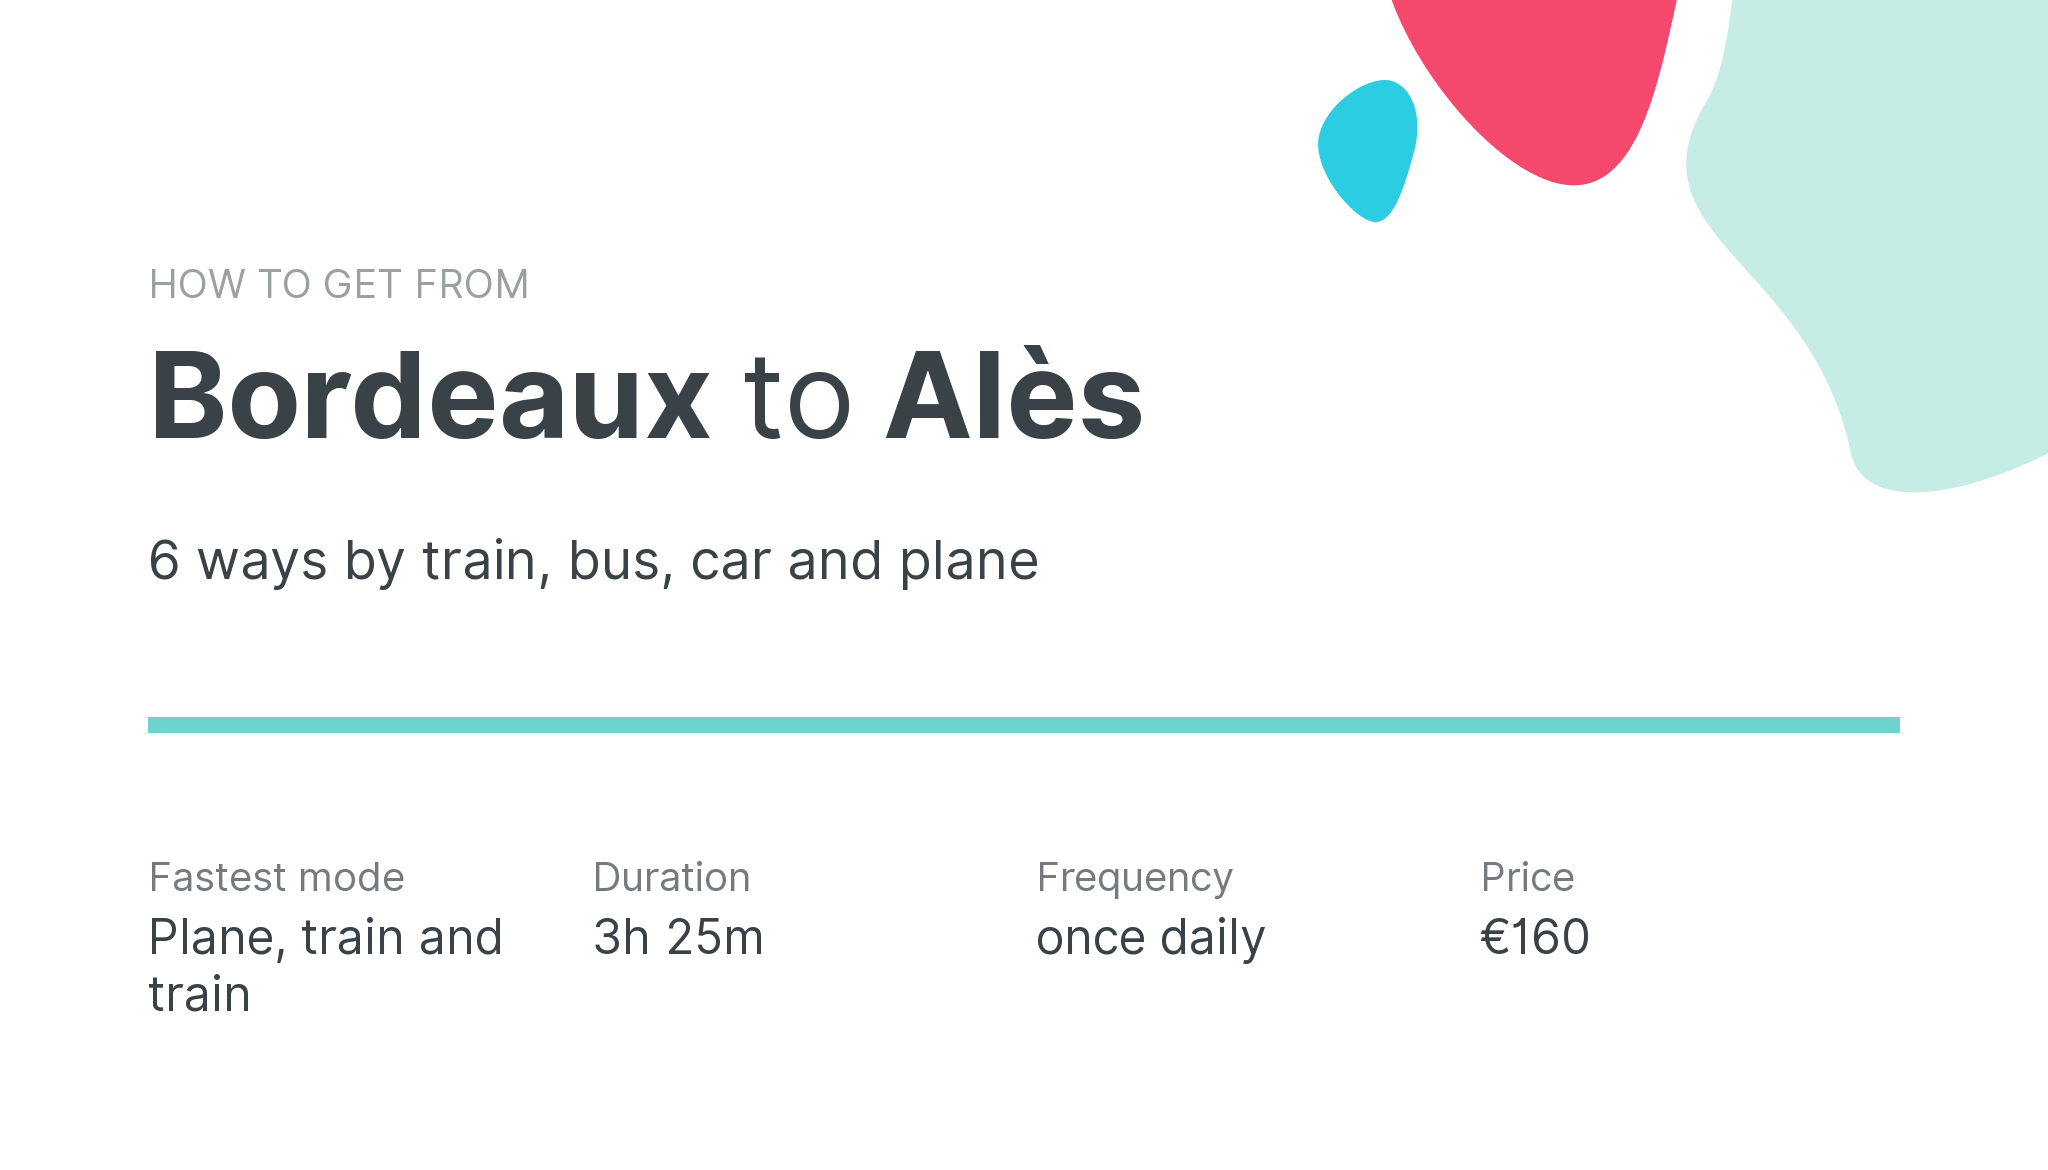 How do I get from Bordeaux to Alès